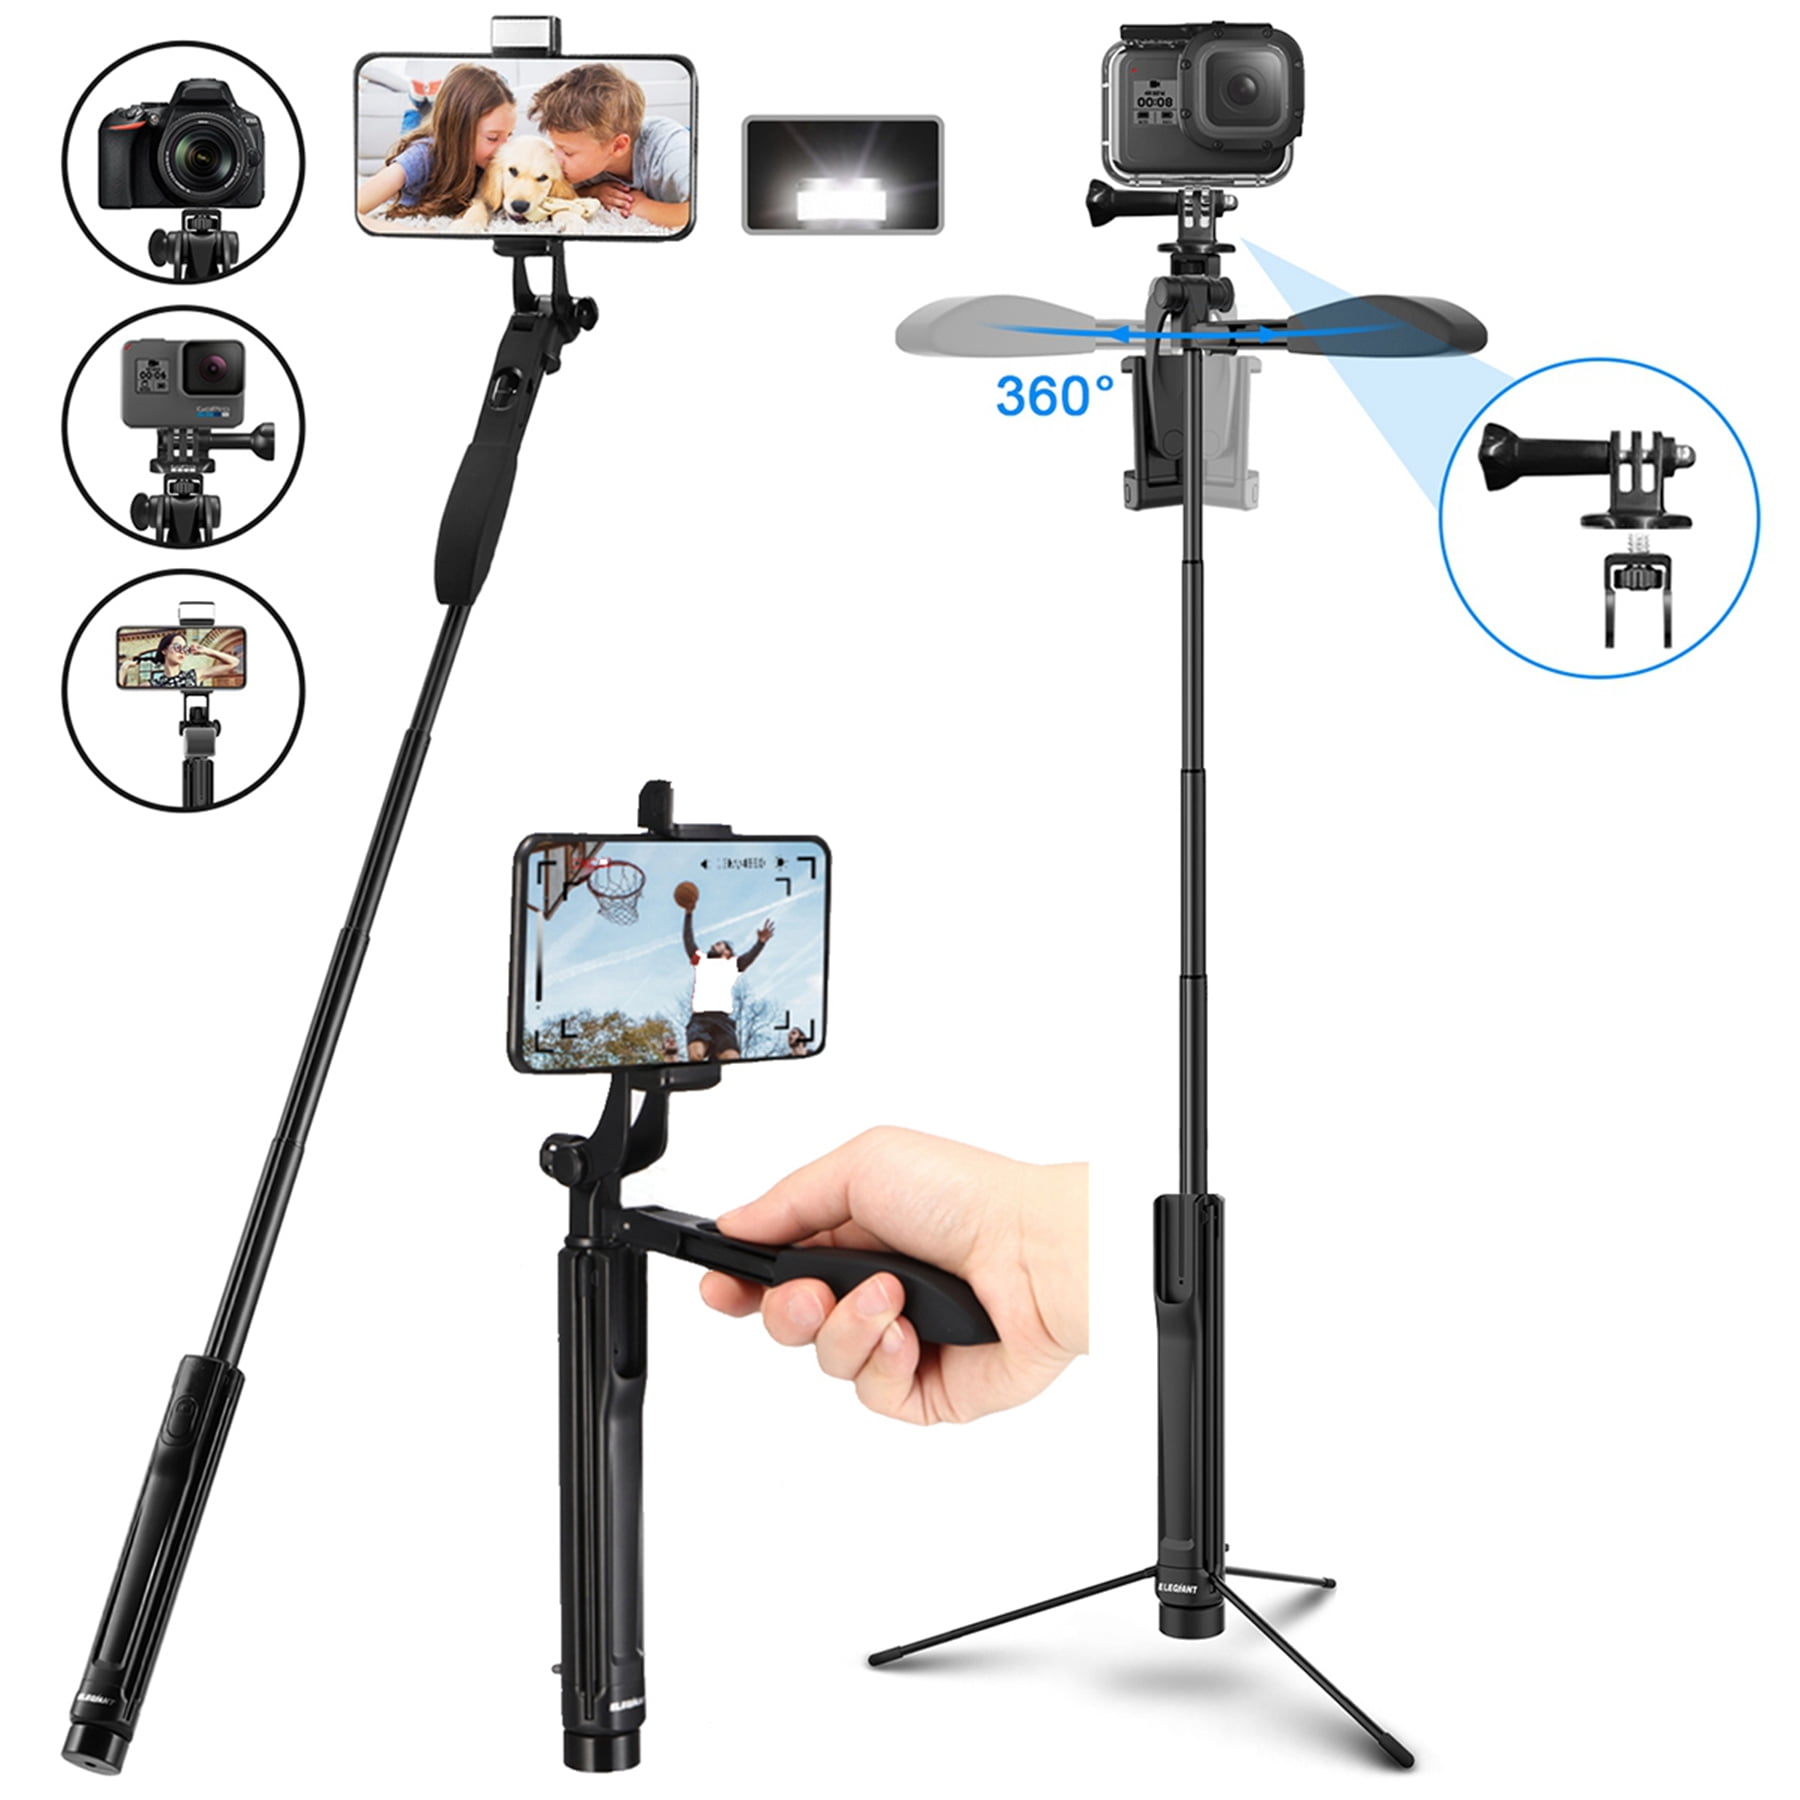 4-in-1 Bluetooth Stick Tripod with LED Fill Light, Panorama Shots 360 Degrees Rotatable Video Anti Shake Balance Handle Gimbal, for DSLR Cameras GoPro Photography Phone - Black -